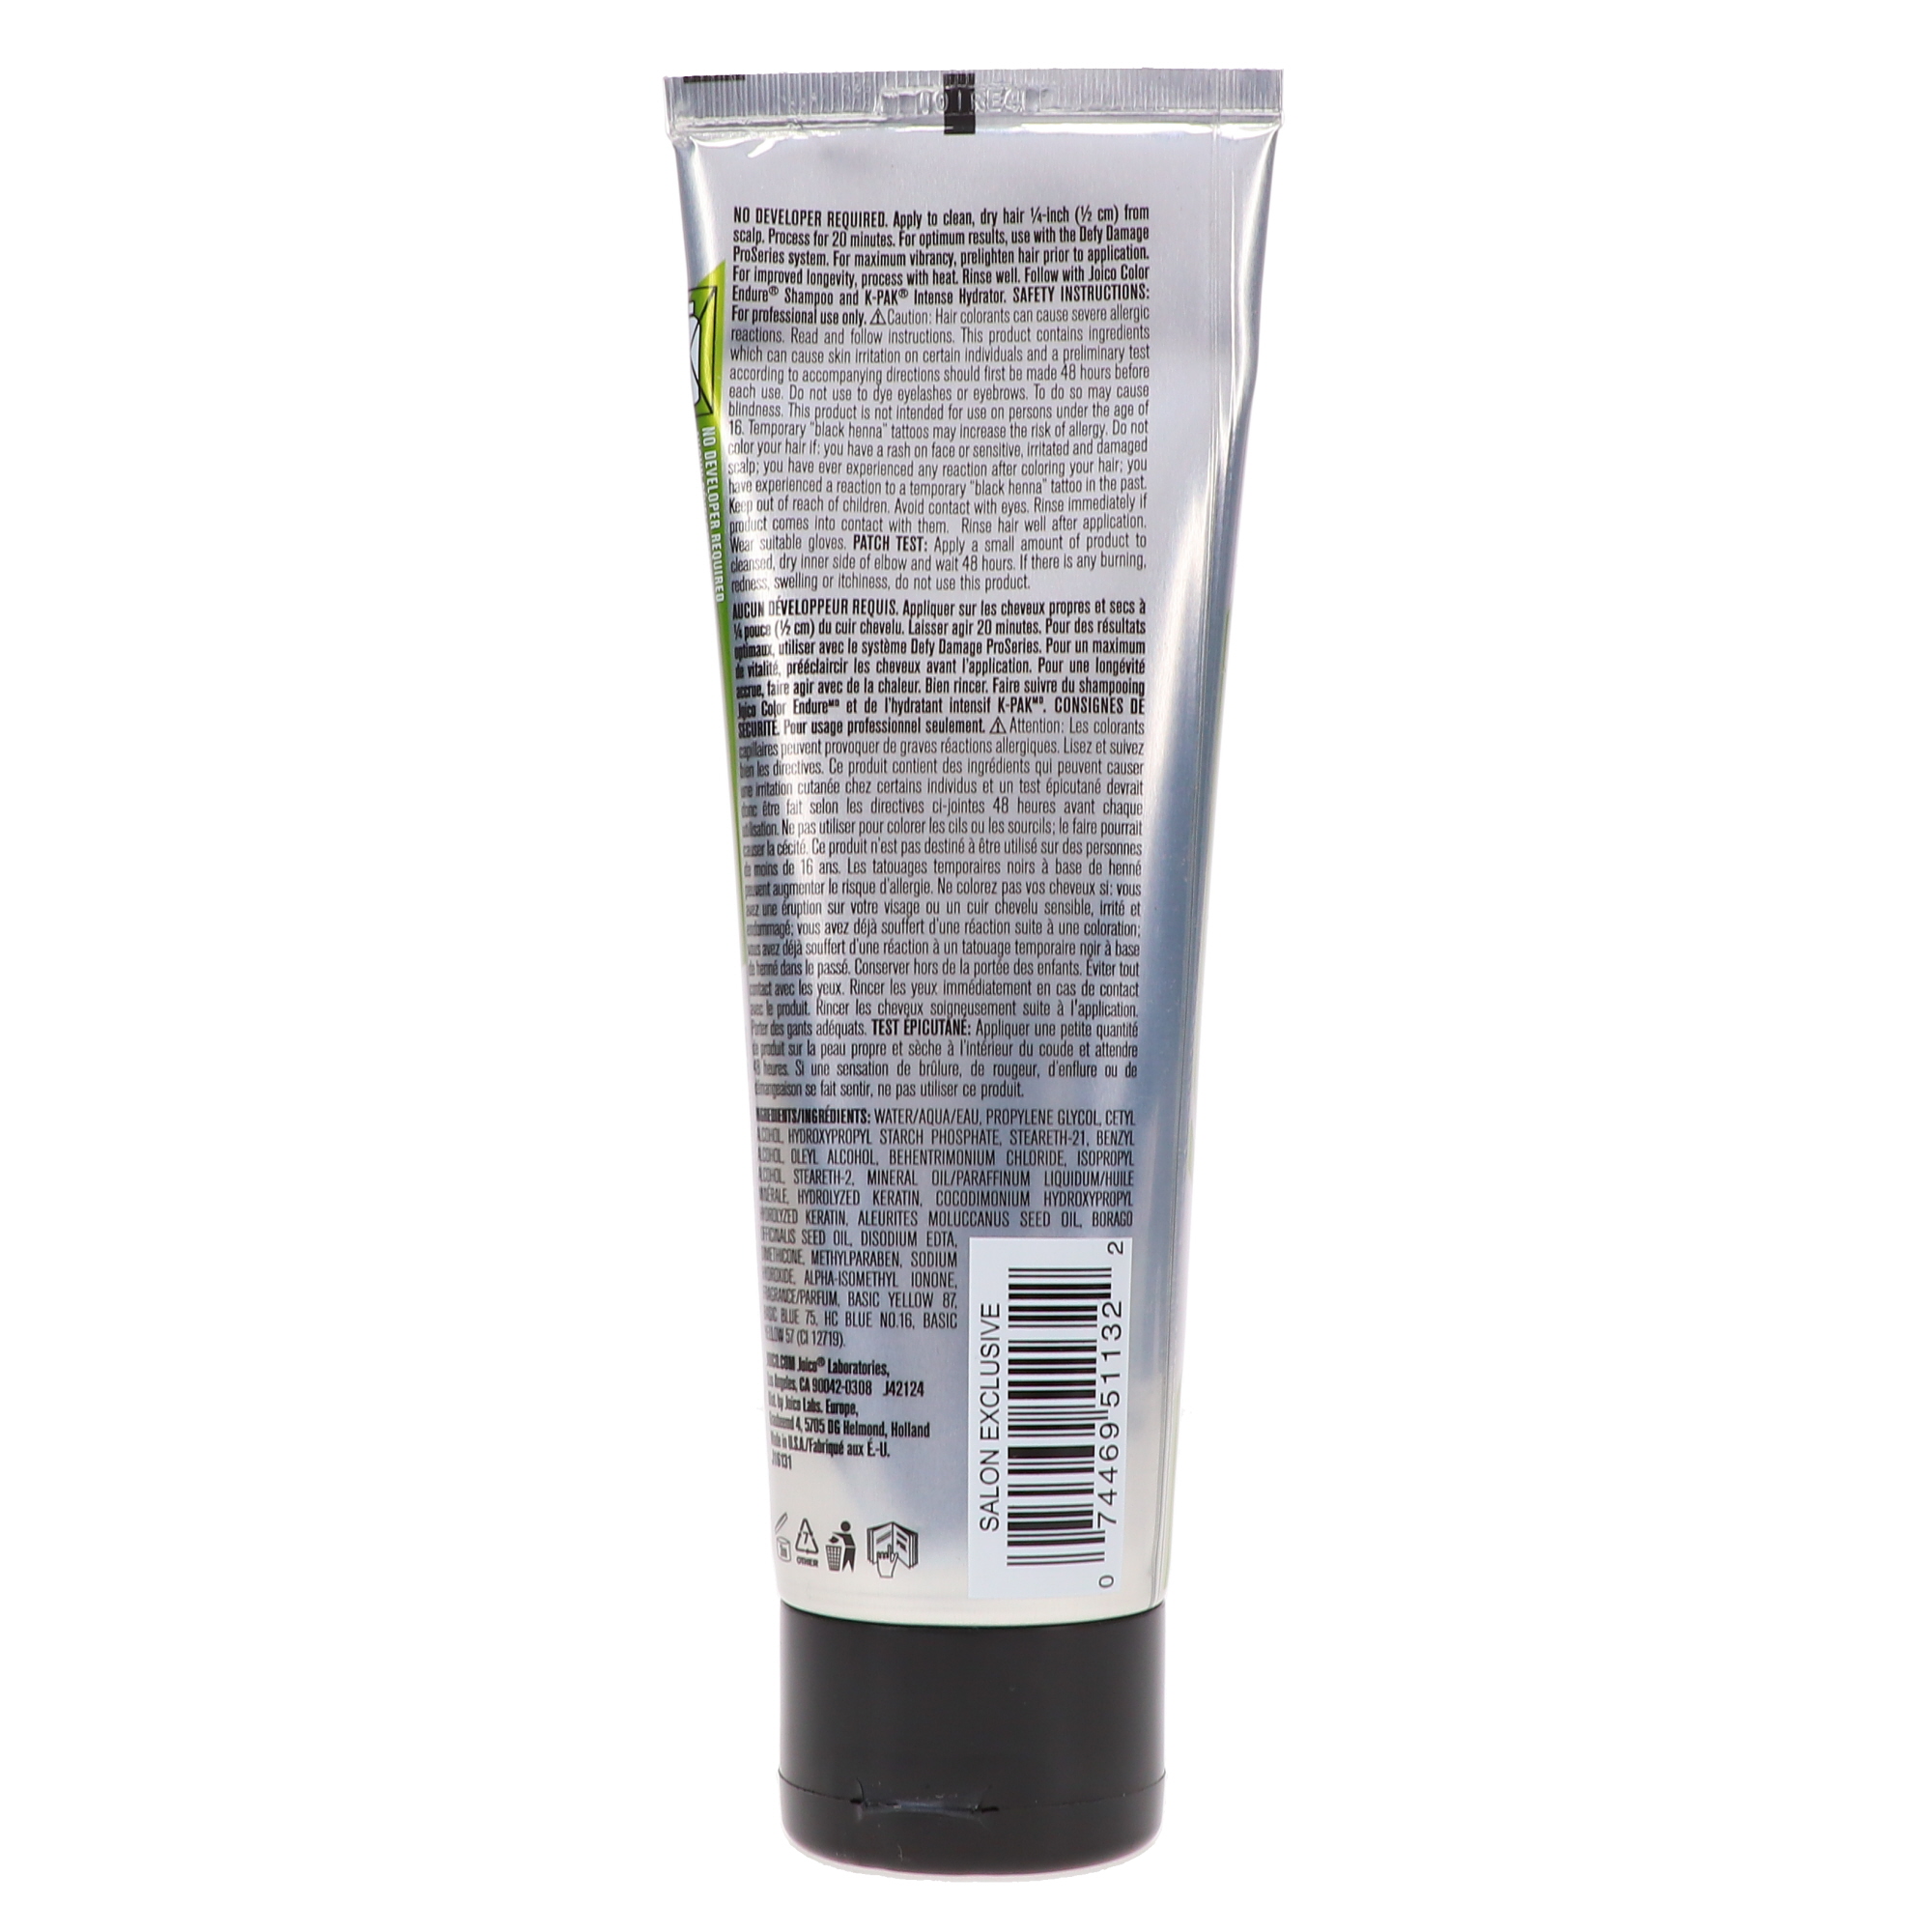 Joico Color Intensity Semi Permanent Shade Limelight 4 oz - image 5 of 8